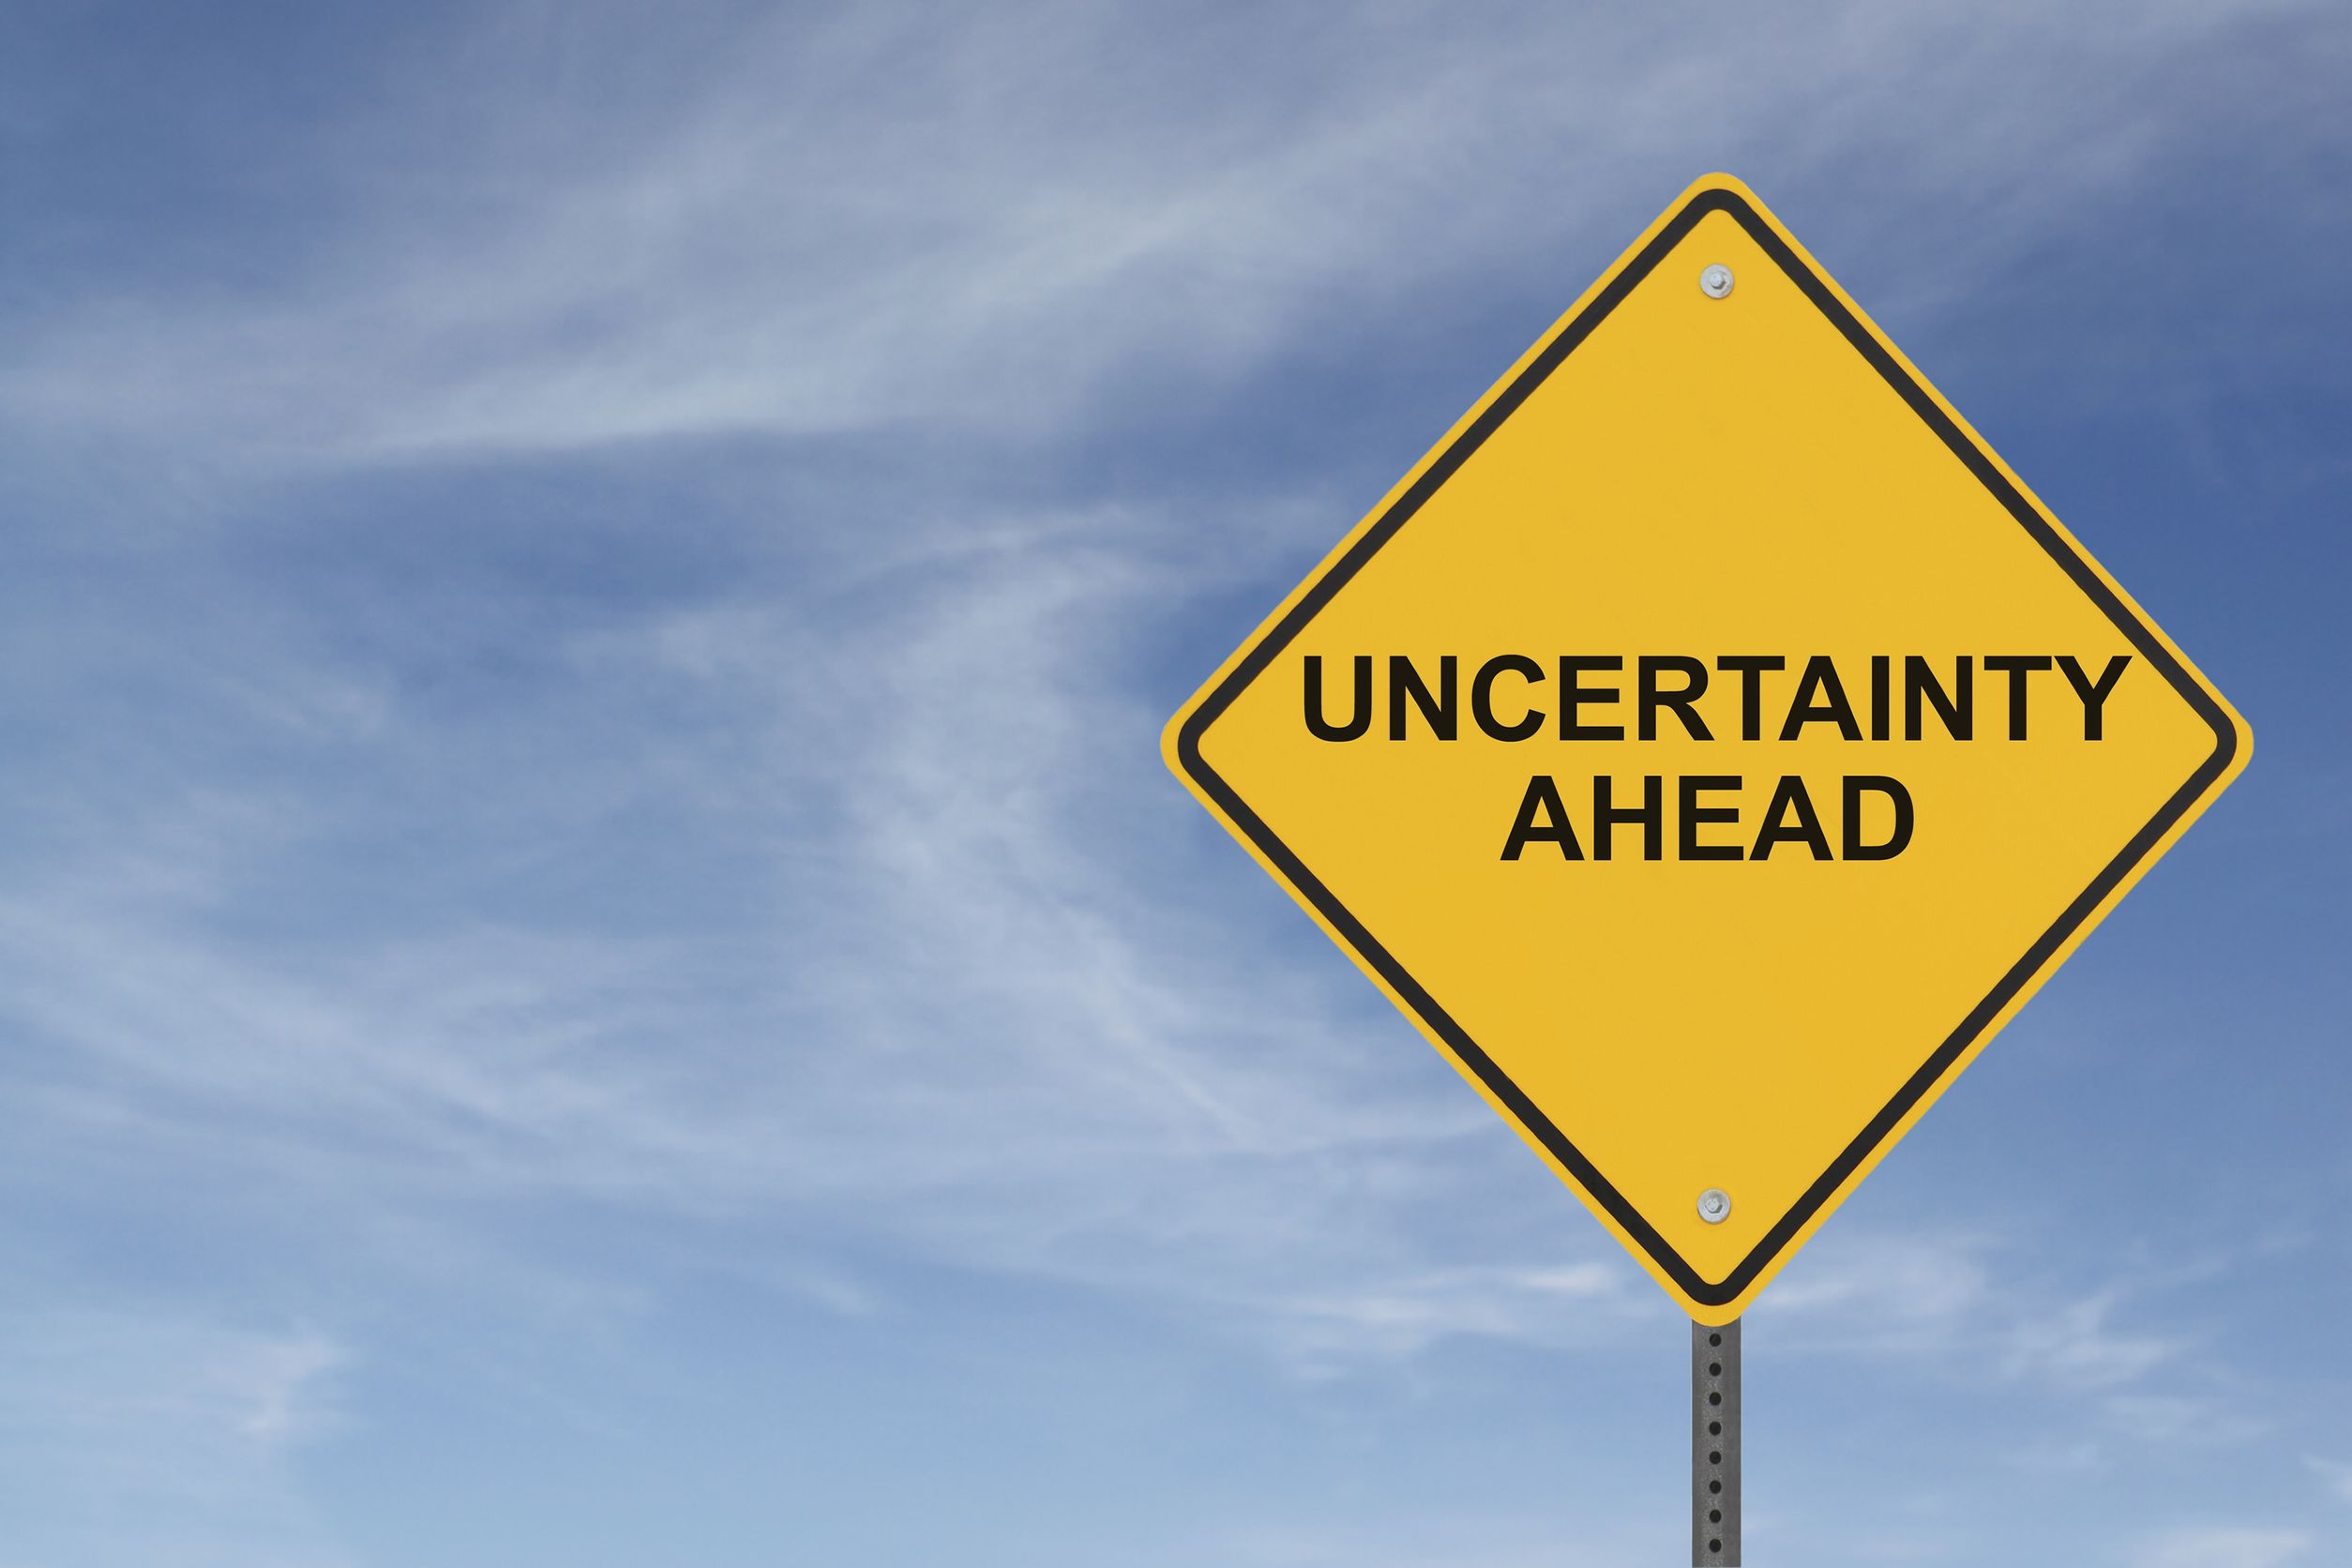 You can find peace in times of uncertainty. The stress of uncertainty poses problems, but you control the amount of peace you find in uncertainty. Here's how.